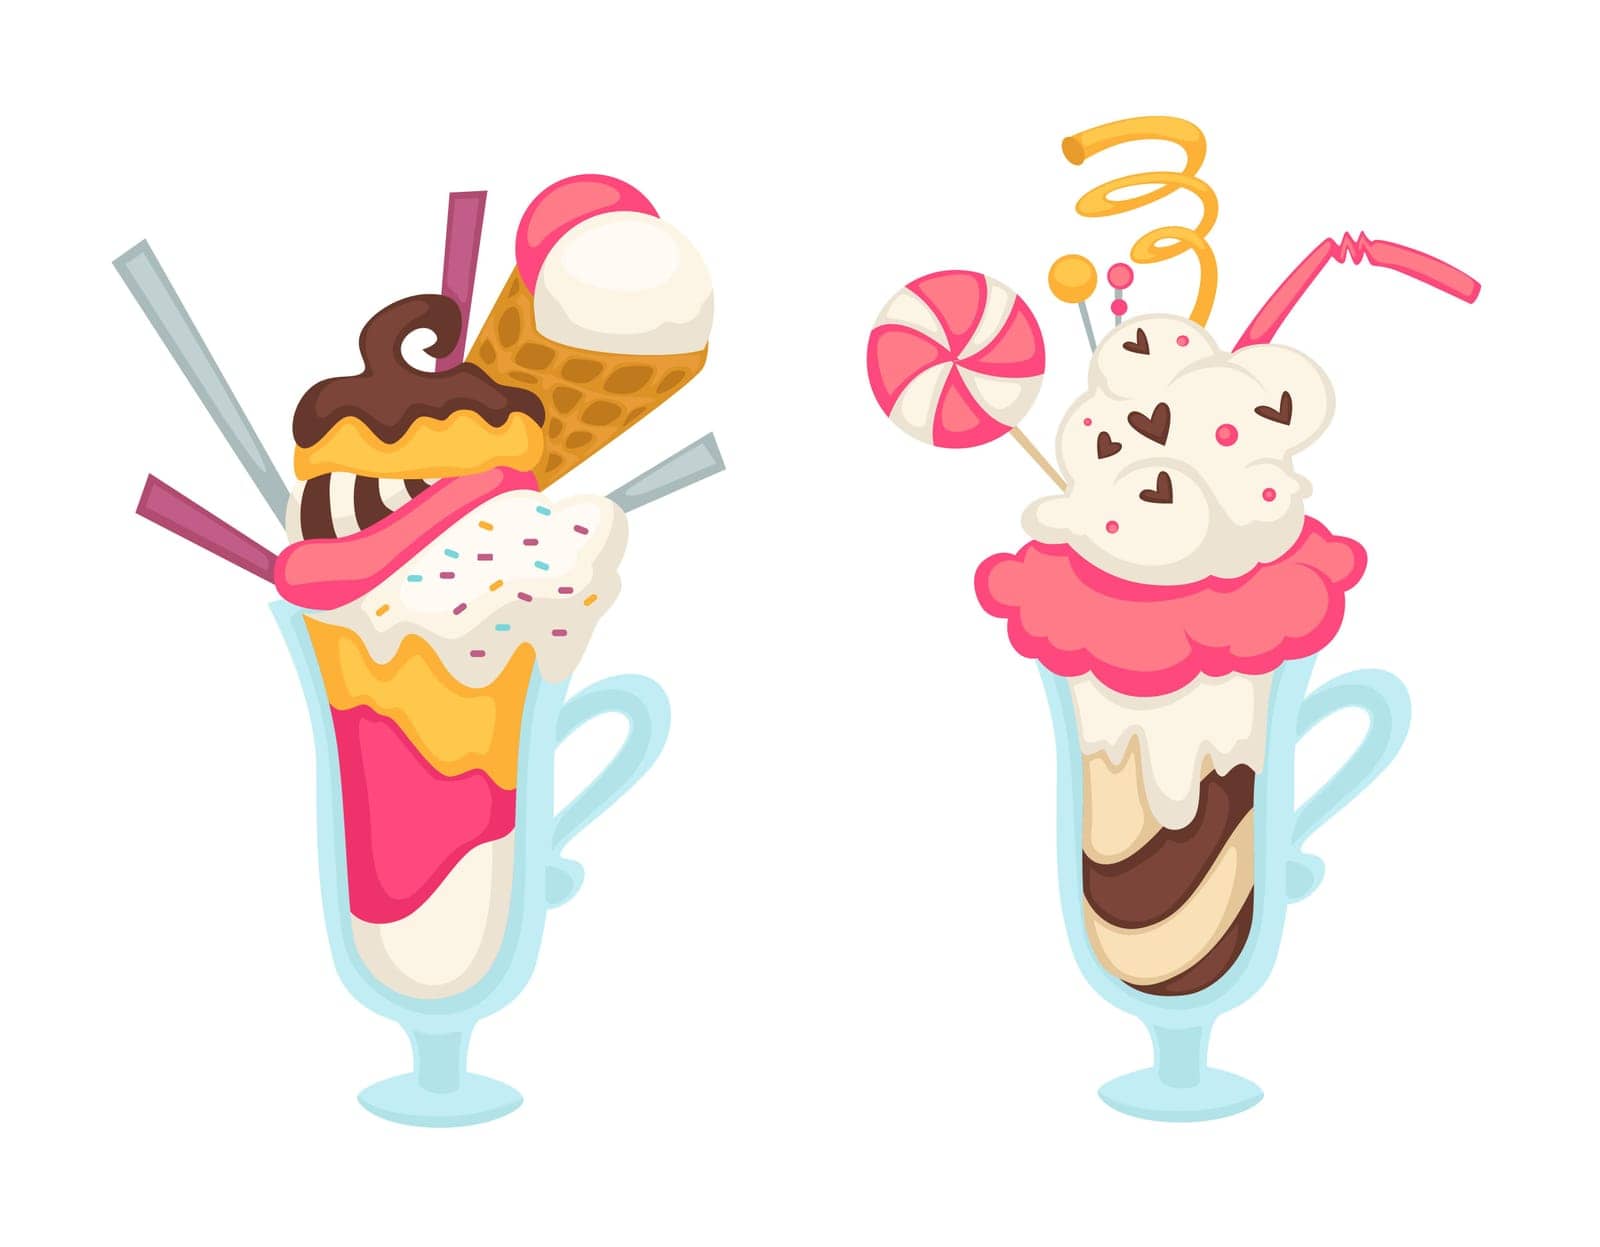 Ice cream dessert with cookies and waffles, isolated frozen tasty meal. Sweets with lollipop and chocolate mousse or topping, vanilla or strawberry filling. Gelato in restaurant. Vector in flat style